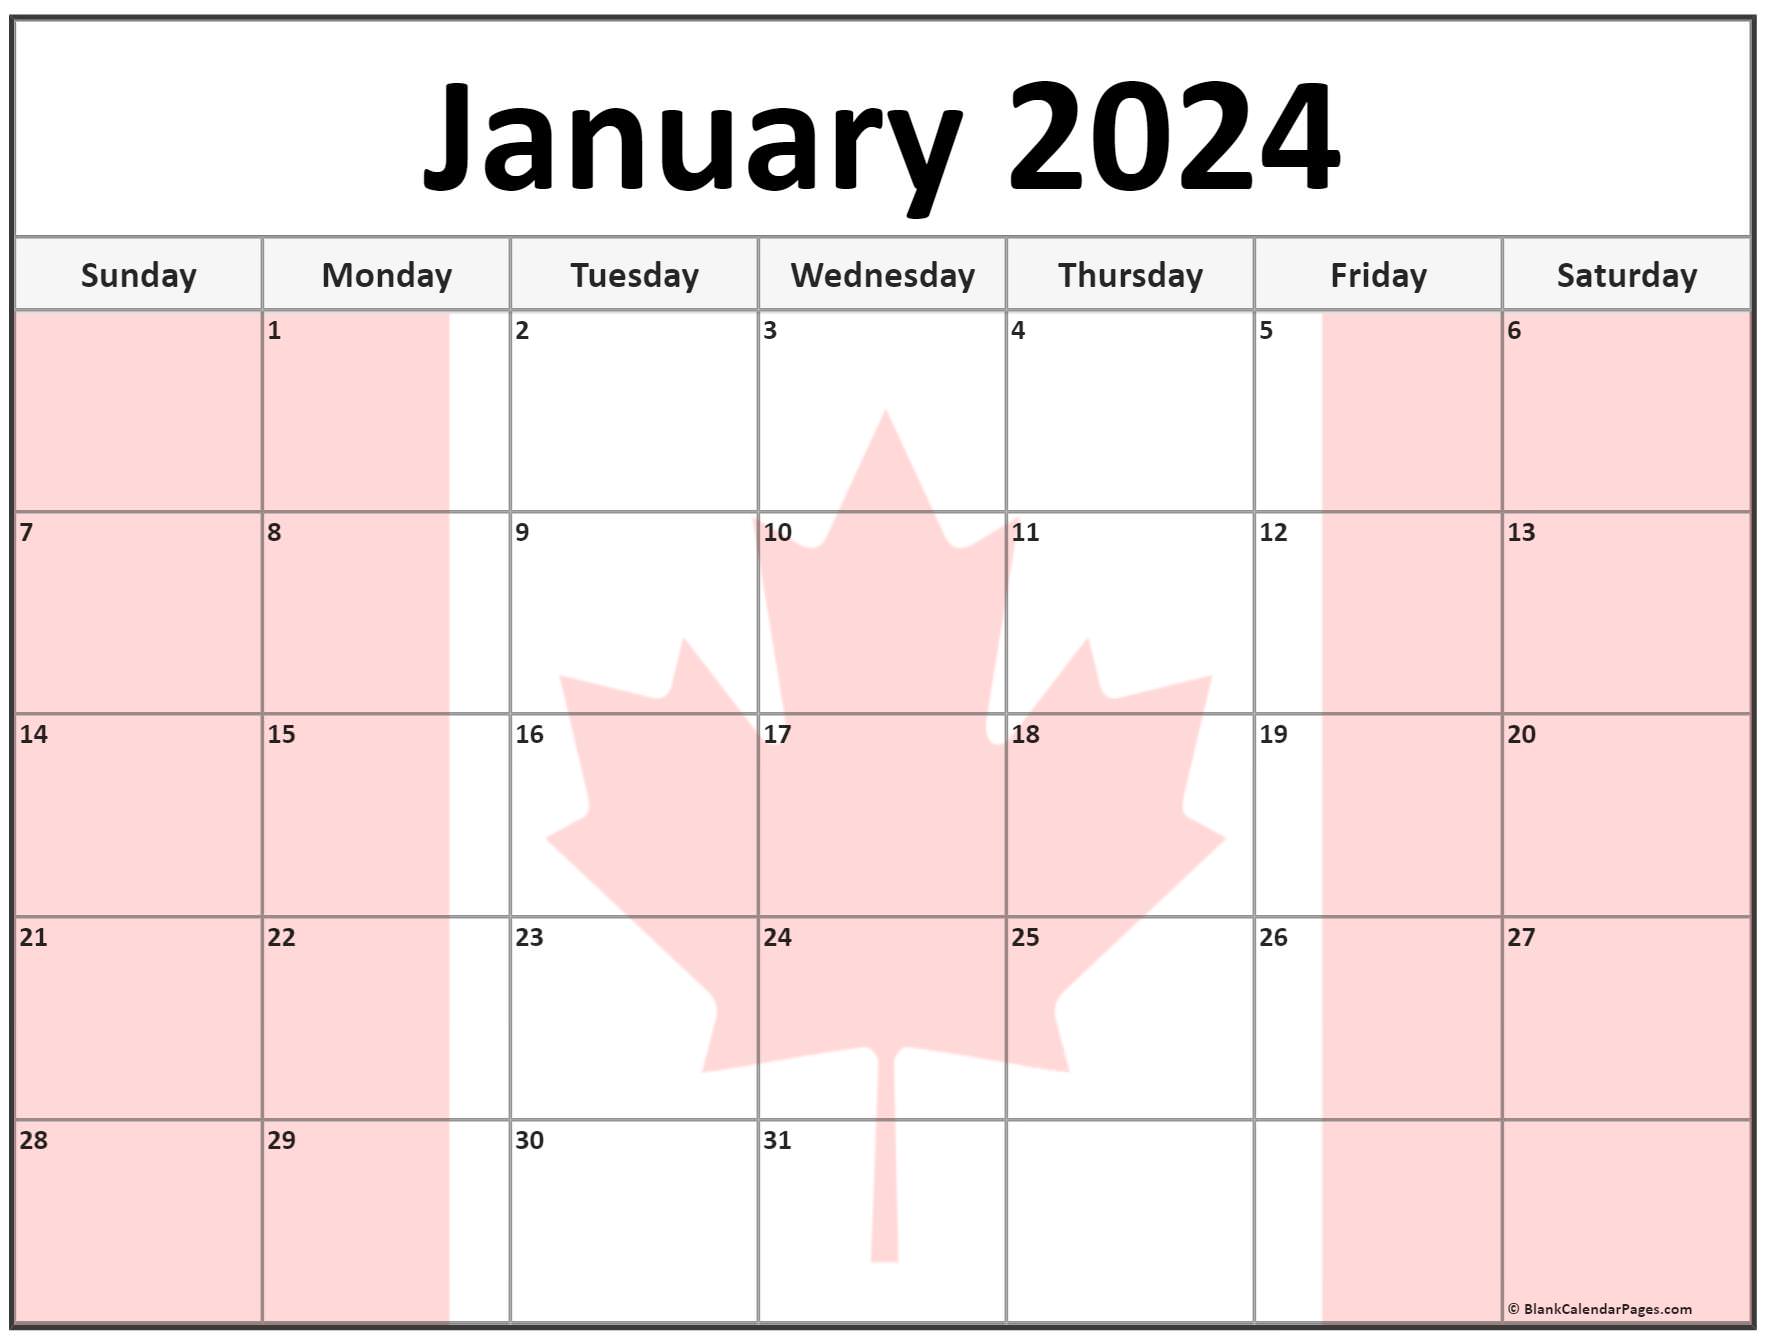 Collection of January 2024 photo calendars with image filters